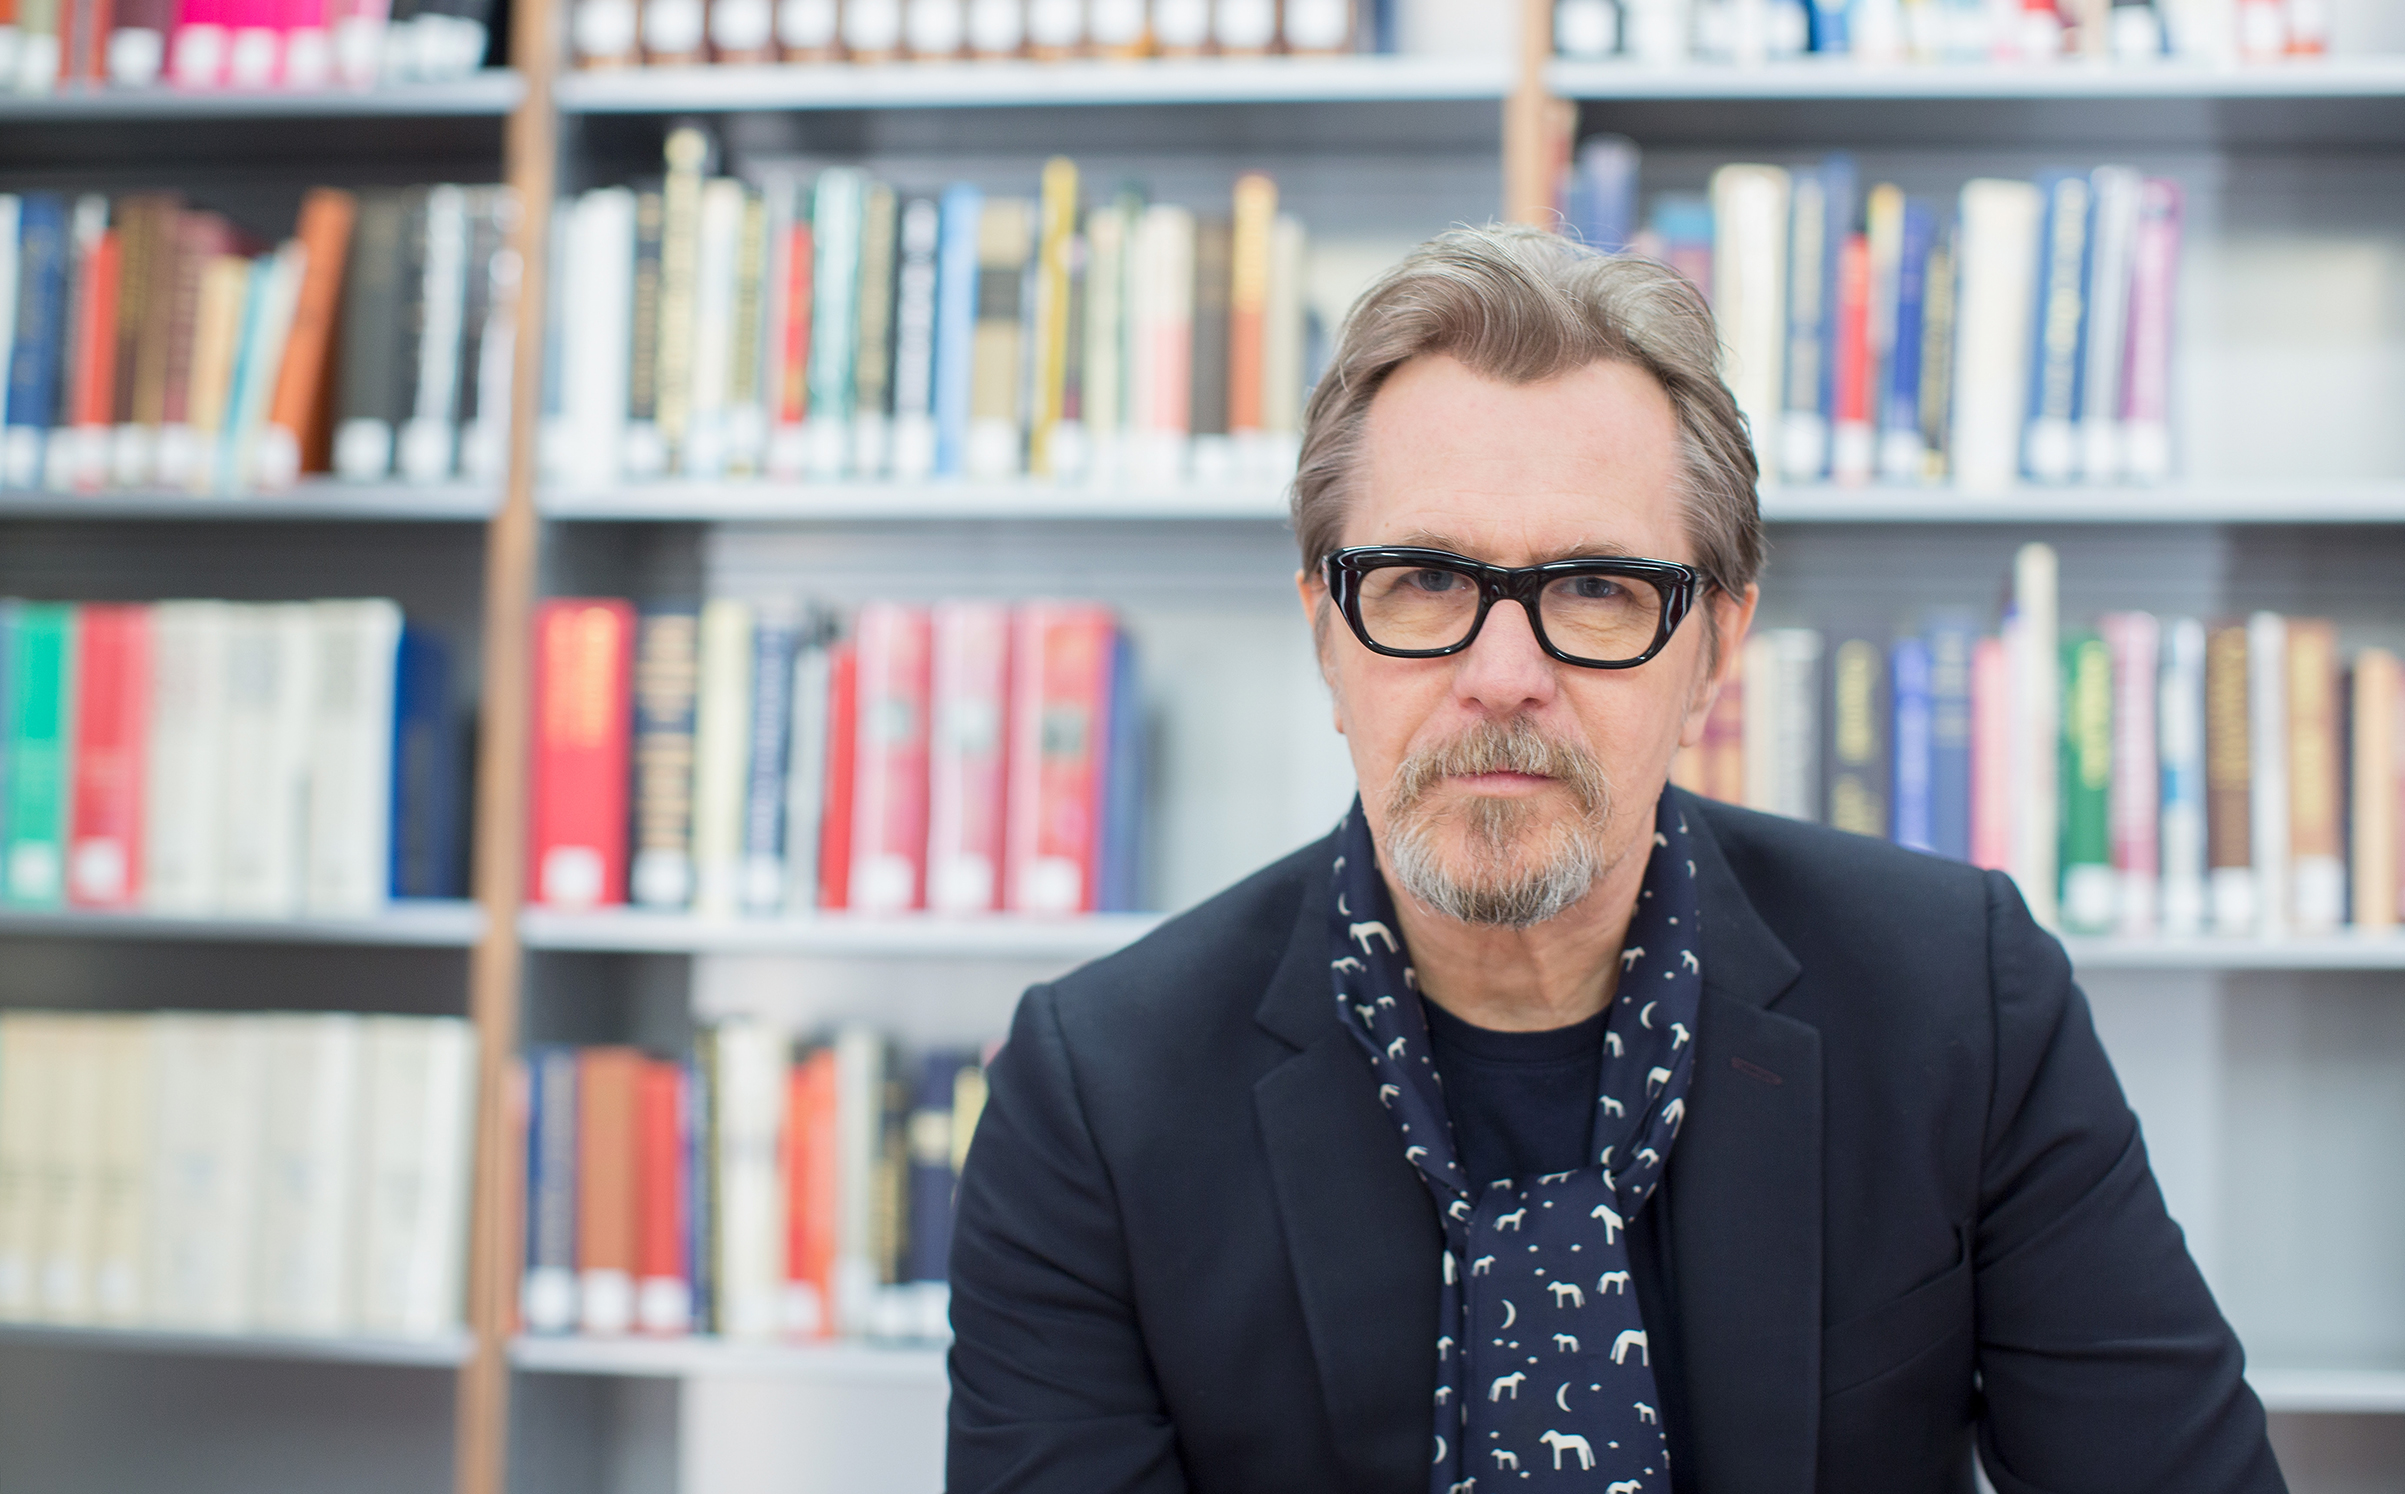 Actor Gary Oldman at Churchill Library Meet and Greet - Darkest Hour Tour at National Churchill Library and Center on November 3, 2017 in Washington, DC. (Tasos Katopodis—Focus Features/Getty Images)